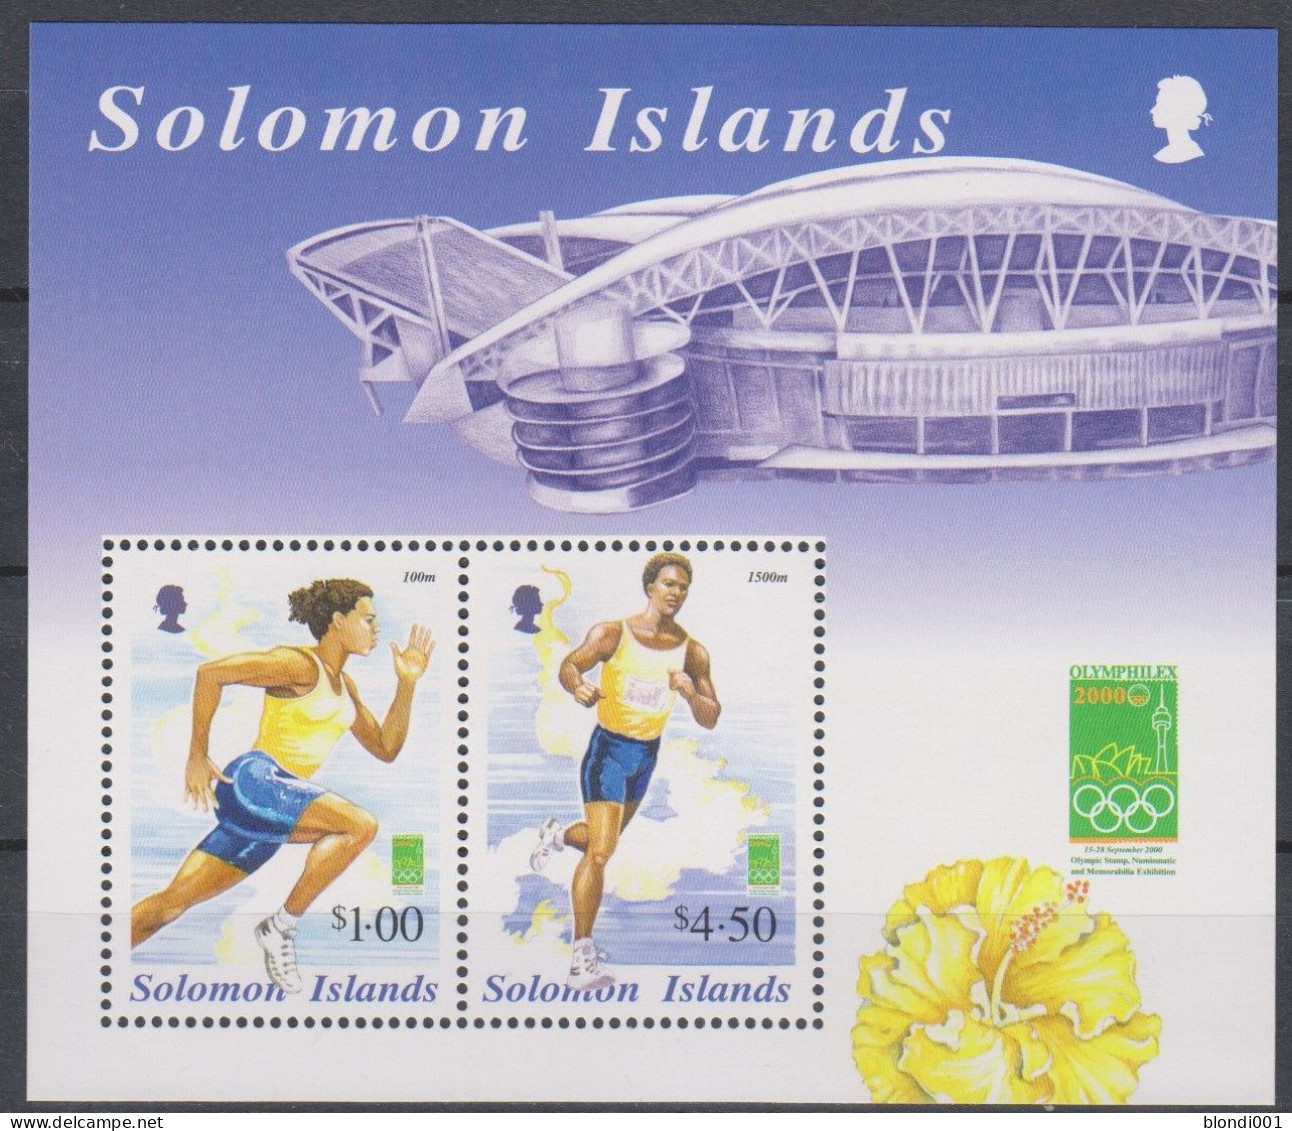 Olympic 2000 - Olympiques - Athletics - SOLOMON ISLANDS - S/S MNH - Sommer 2000: Sydney